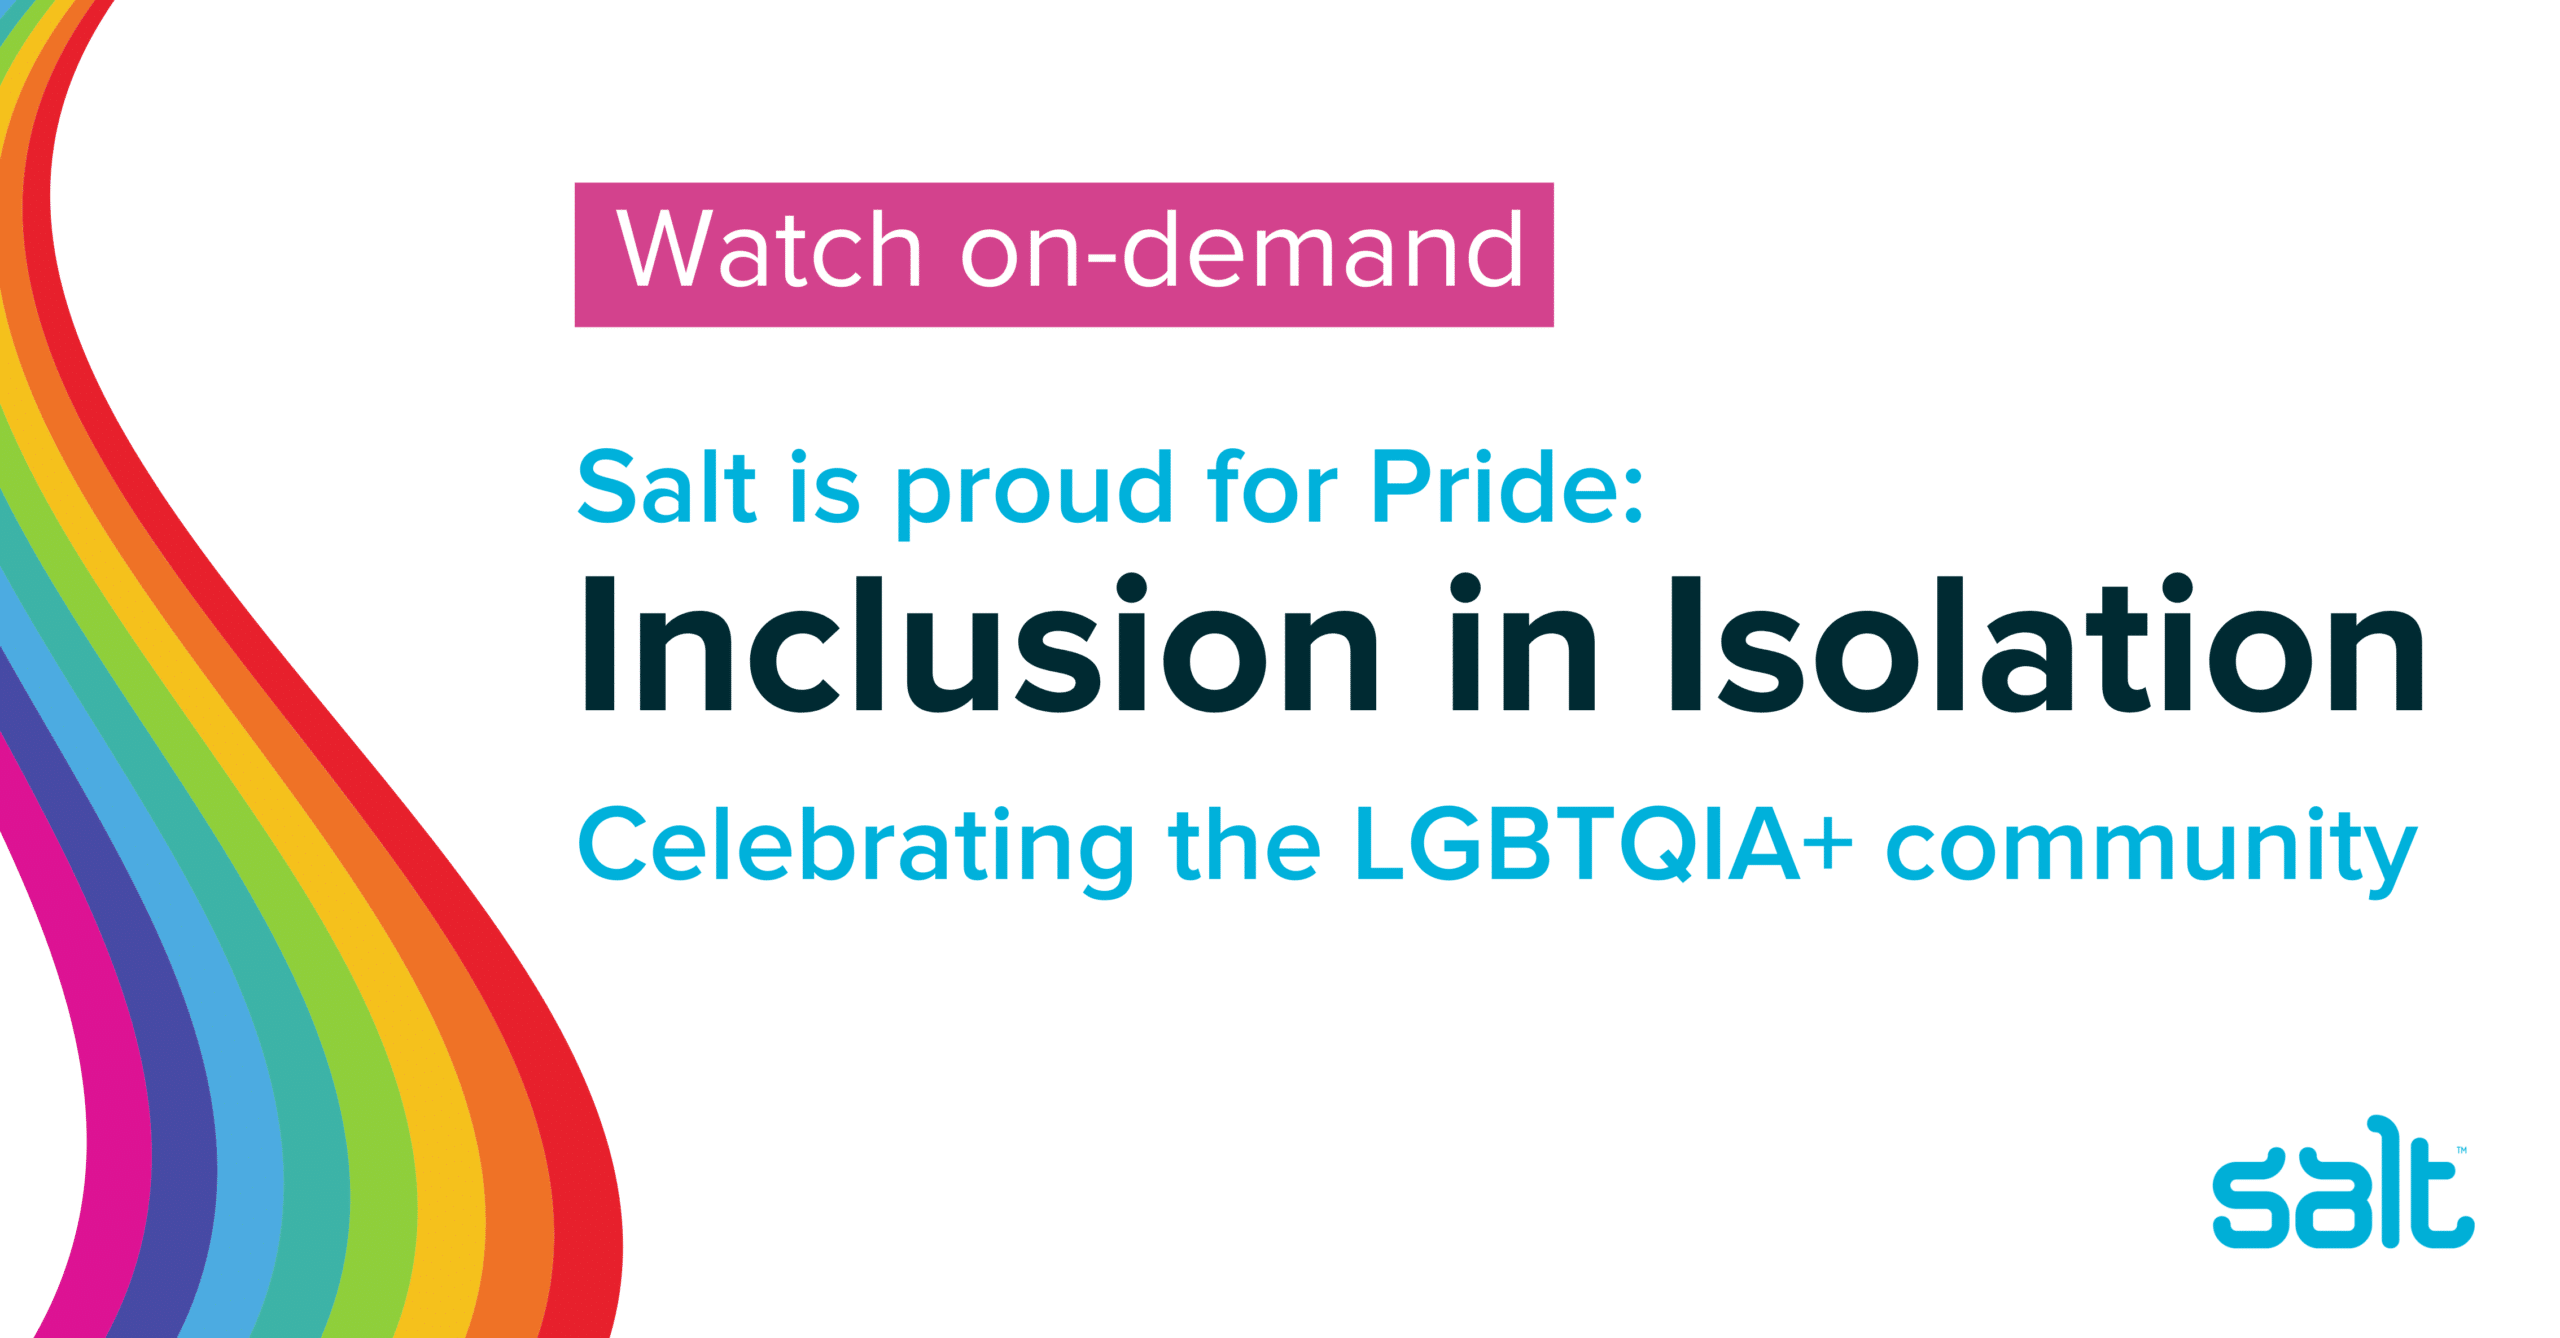 Watch our Pride inclusion webinar on-demand!